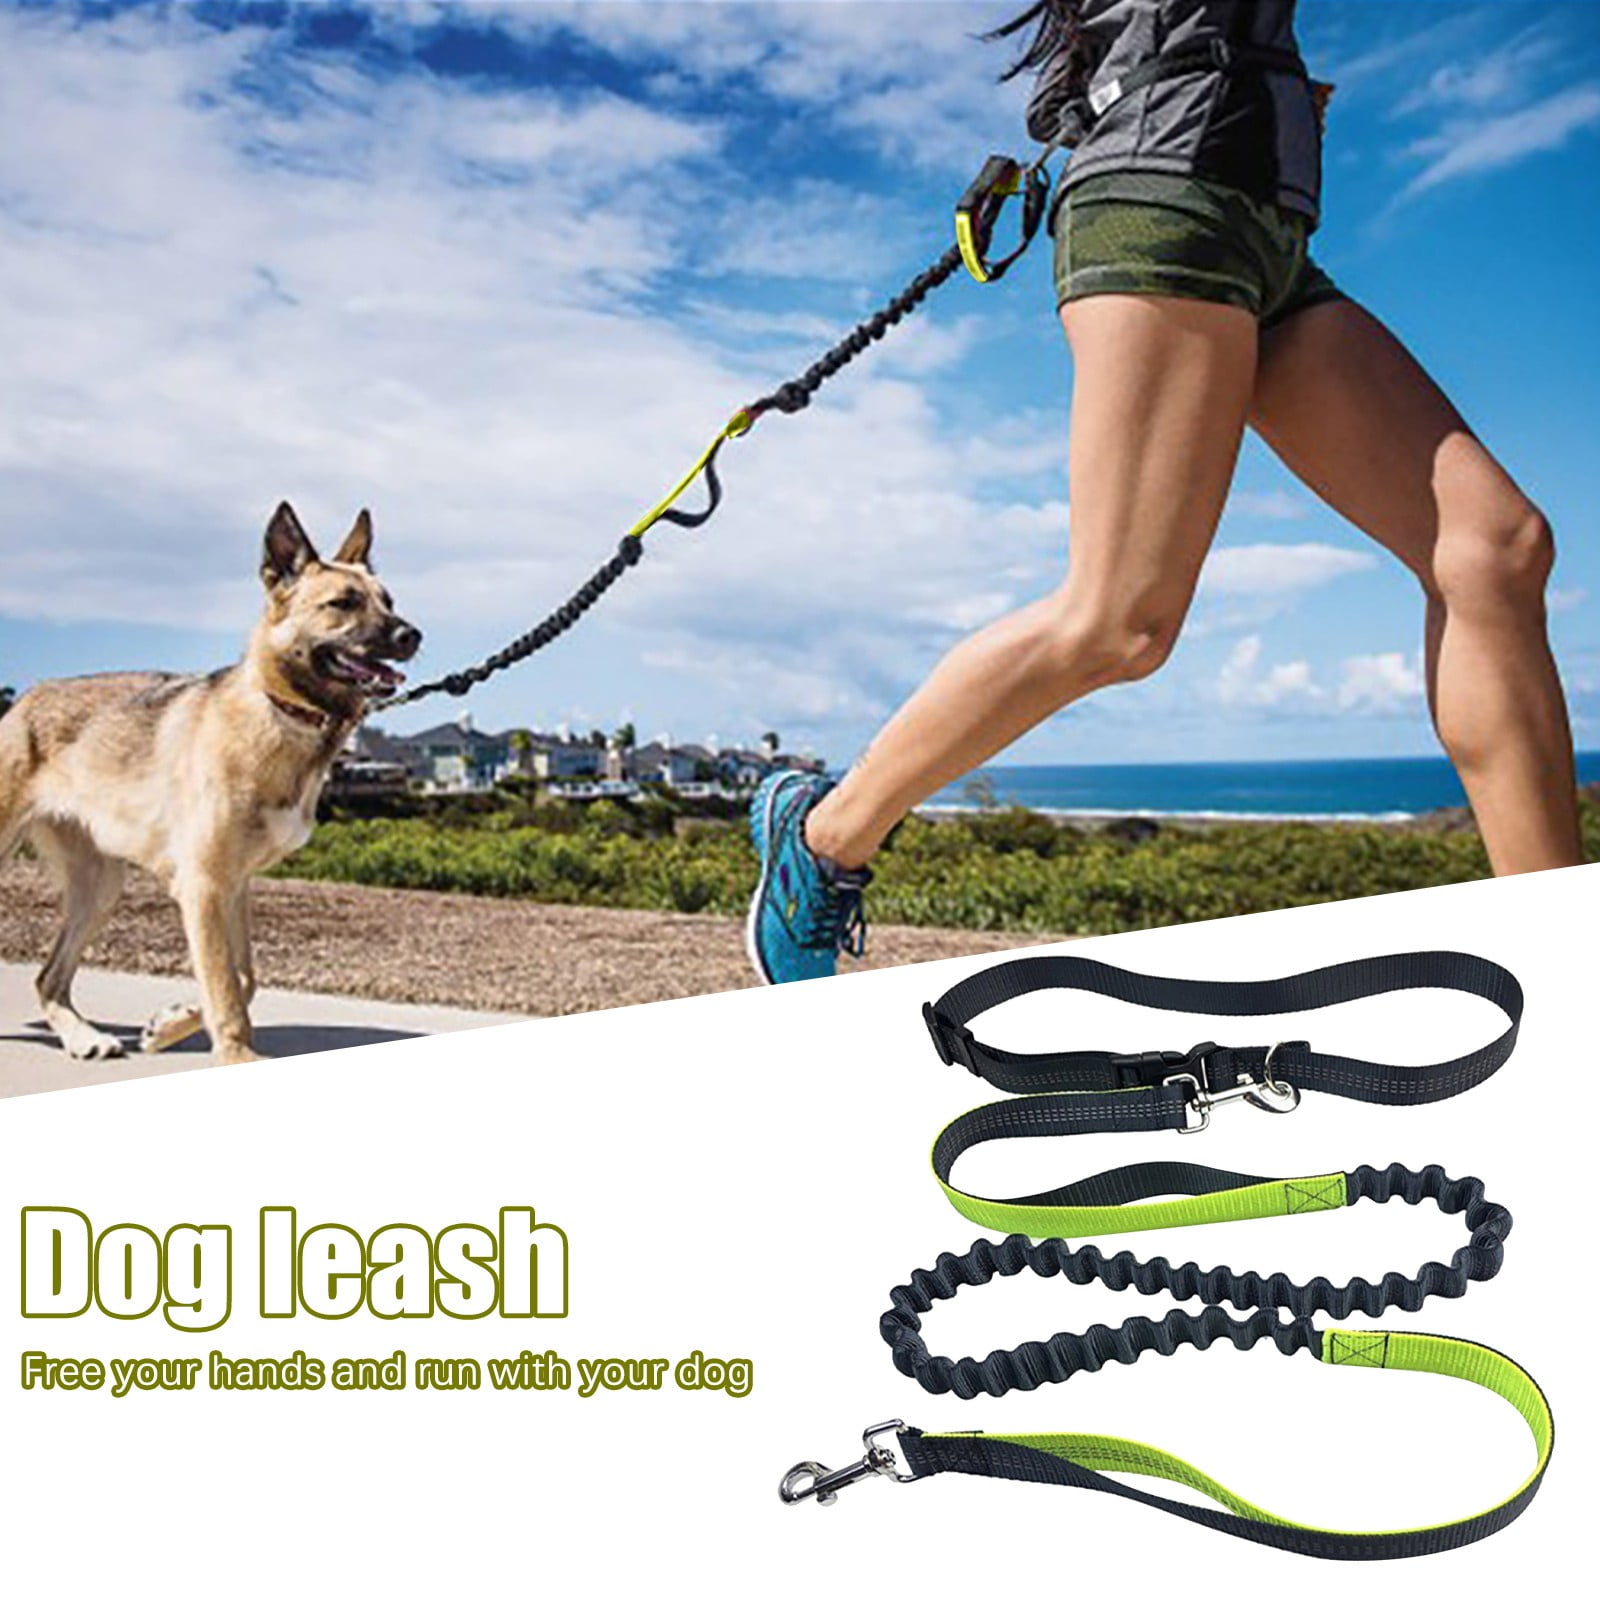 Hands Free Dog Training Leash for Large to Small Dogs 25mm, Black Reflective Waist Leash for Running No Pull Bungee Heavy Duty Long Leash with Double Handle Car Seat Belt 